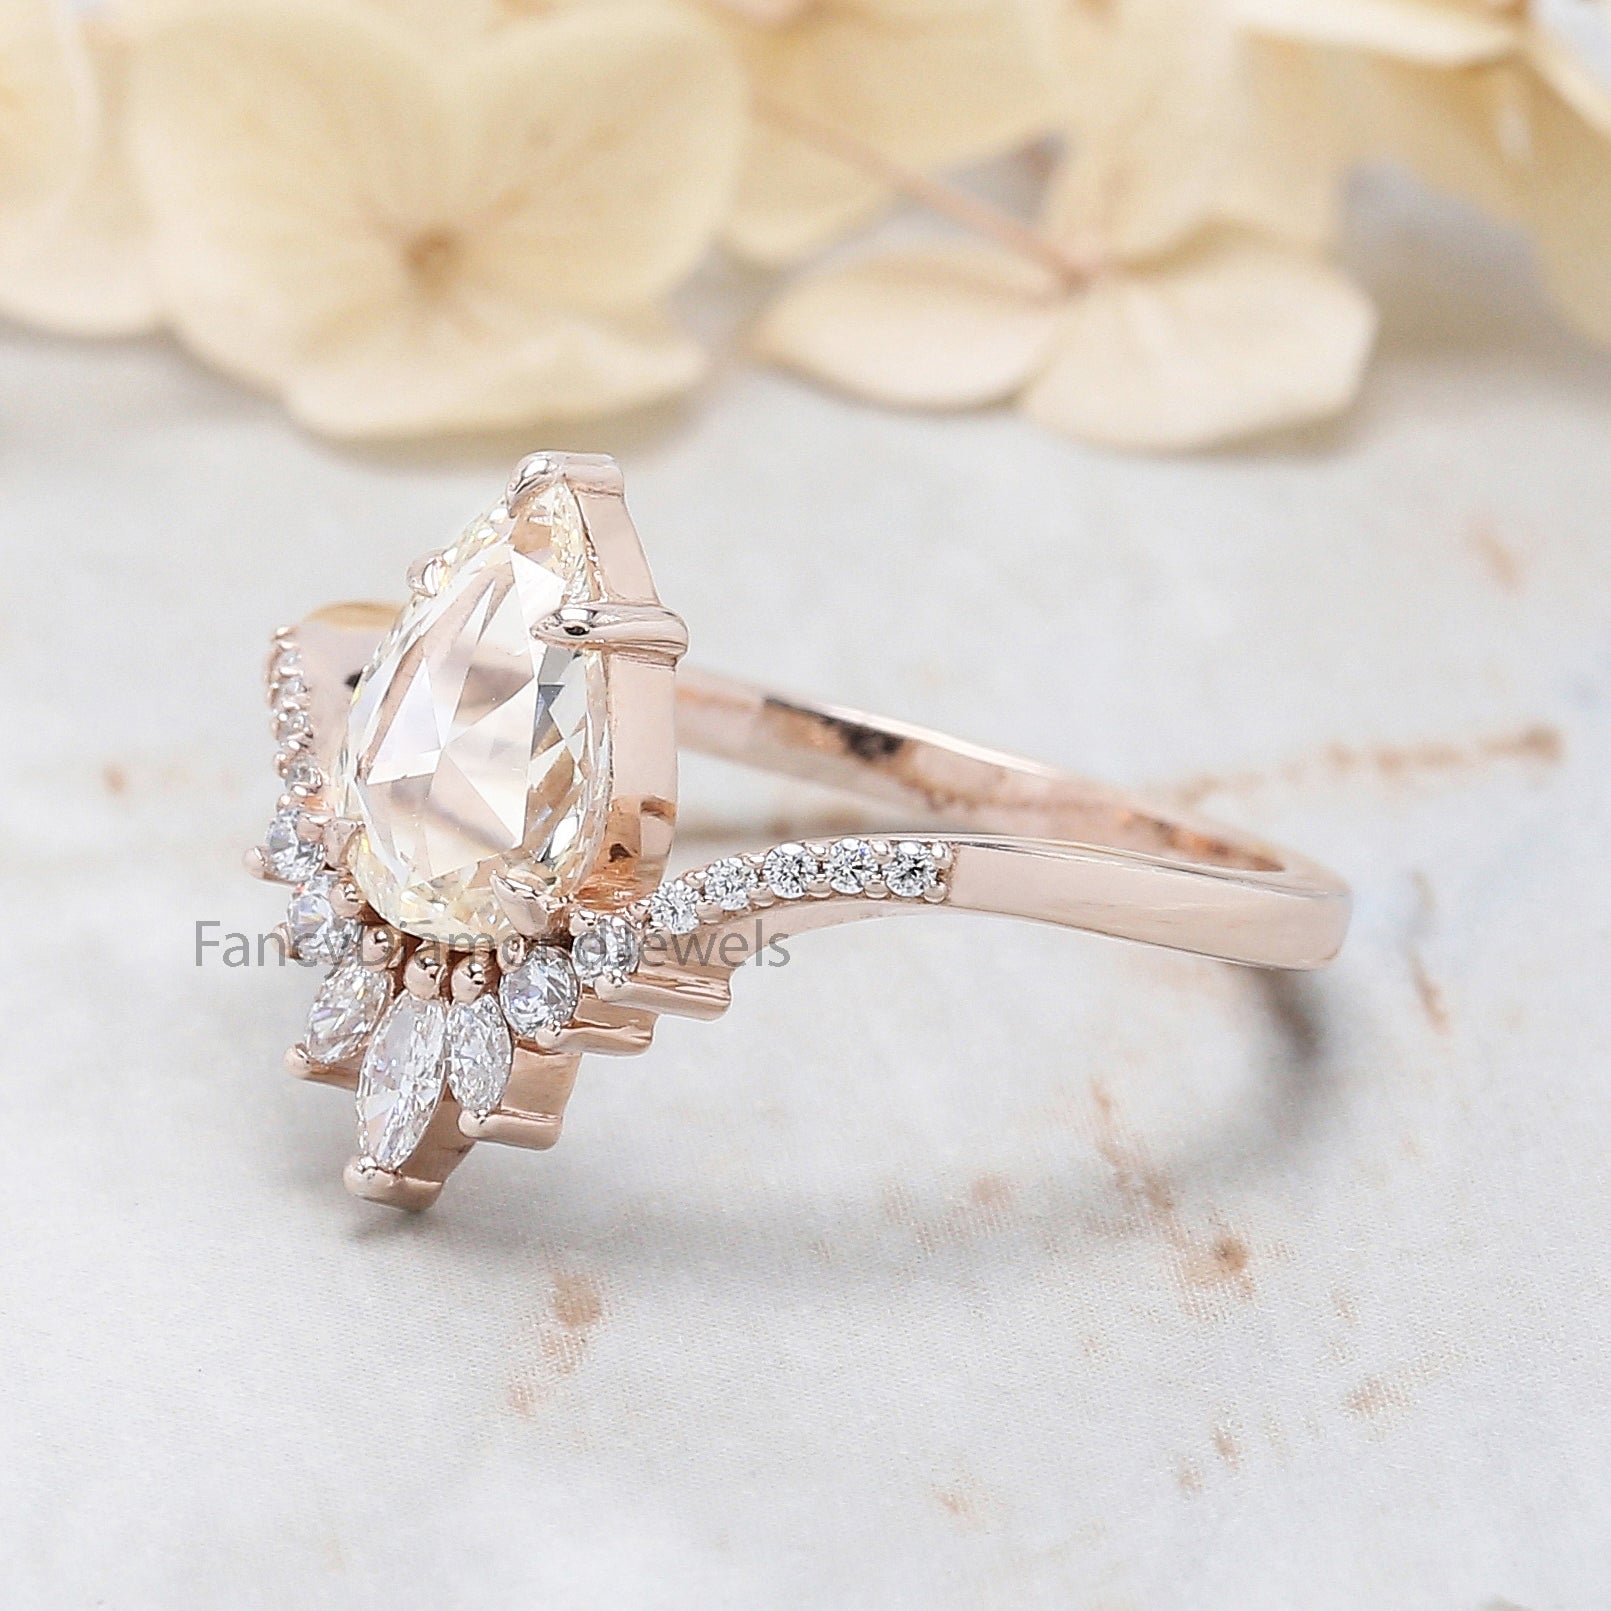 Pear Cut White Color Diamond Ring 0.85 Ct 9.30 MM Pear Shape Diamond Ring 14K Solid Rose Gold Silver Engagement Ring Gift For Her QL5487